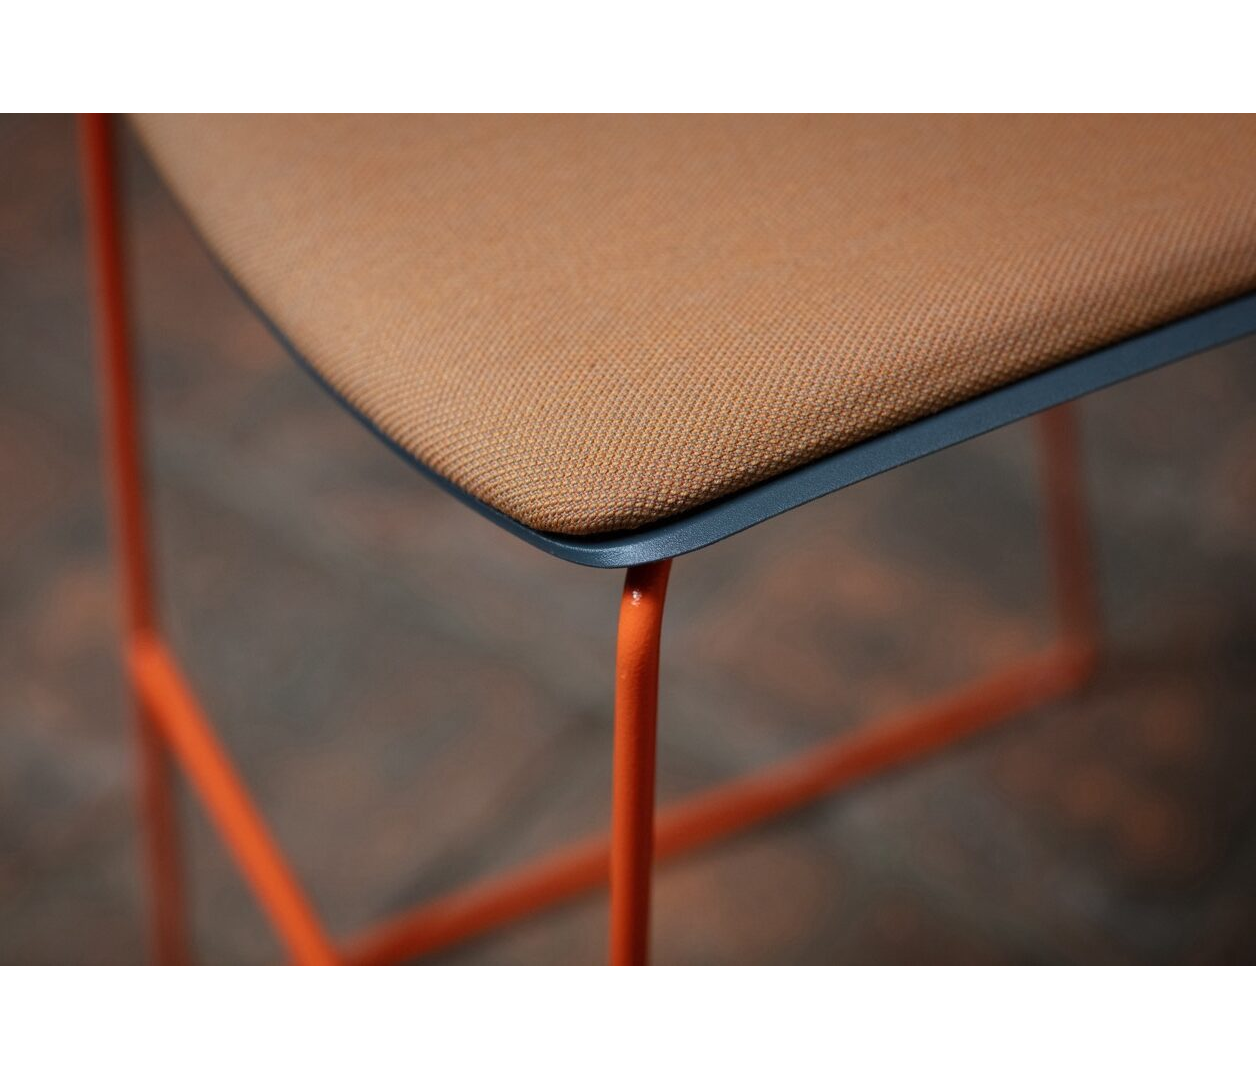 OCEE&FOUR – Chairs – FourSure 105 – Details Image 4 Large Large